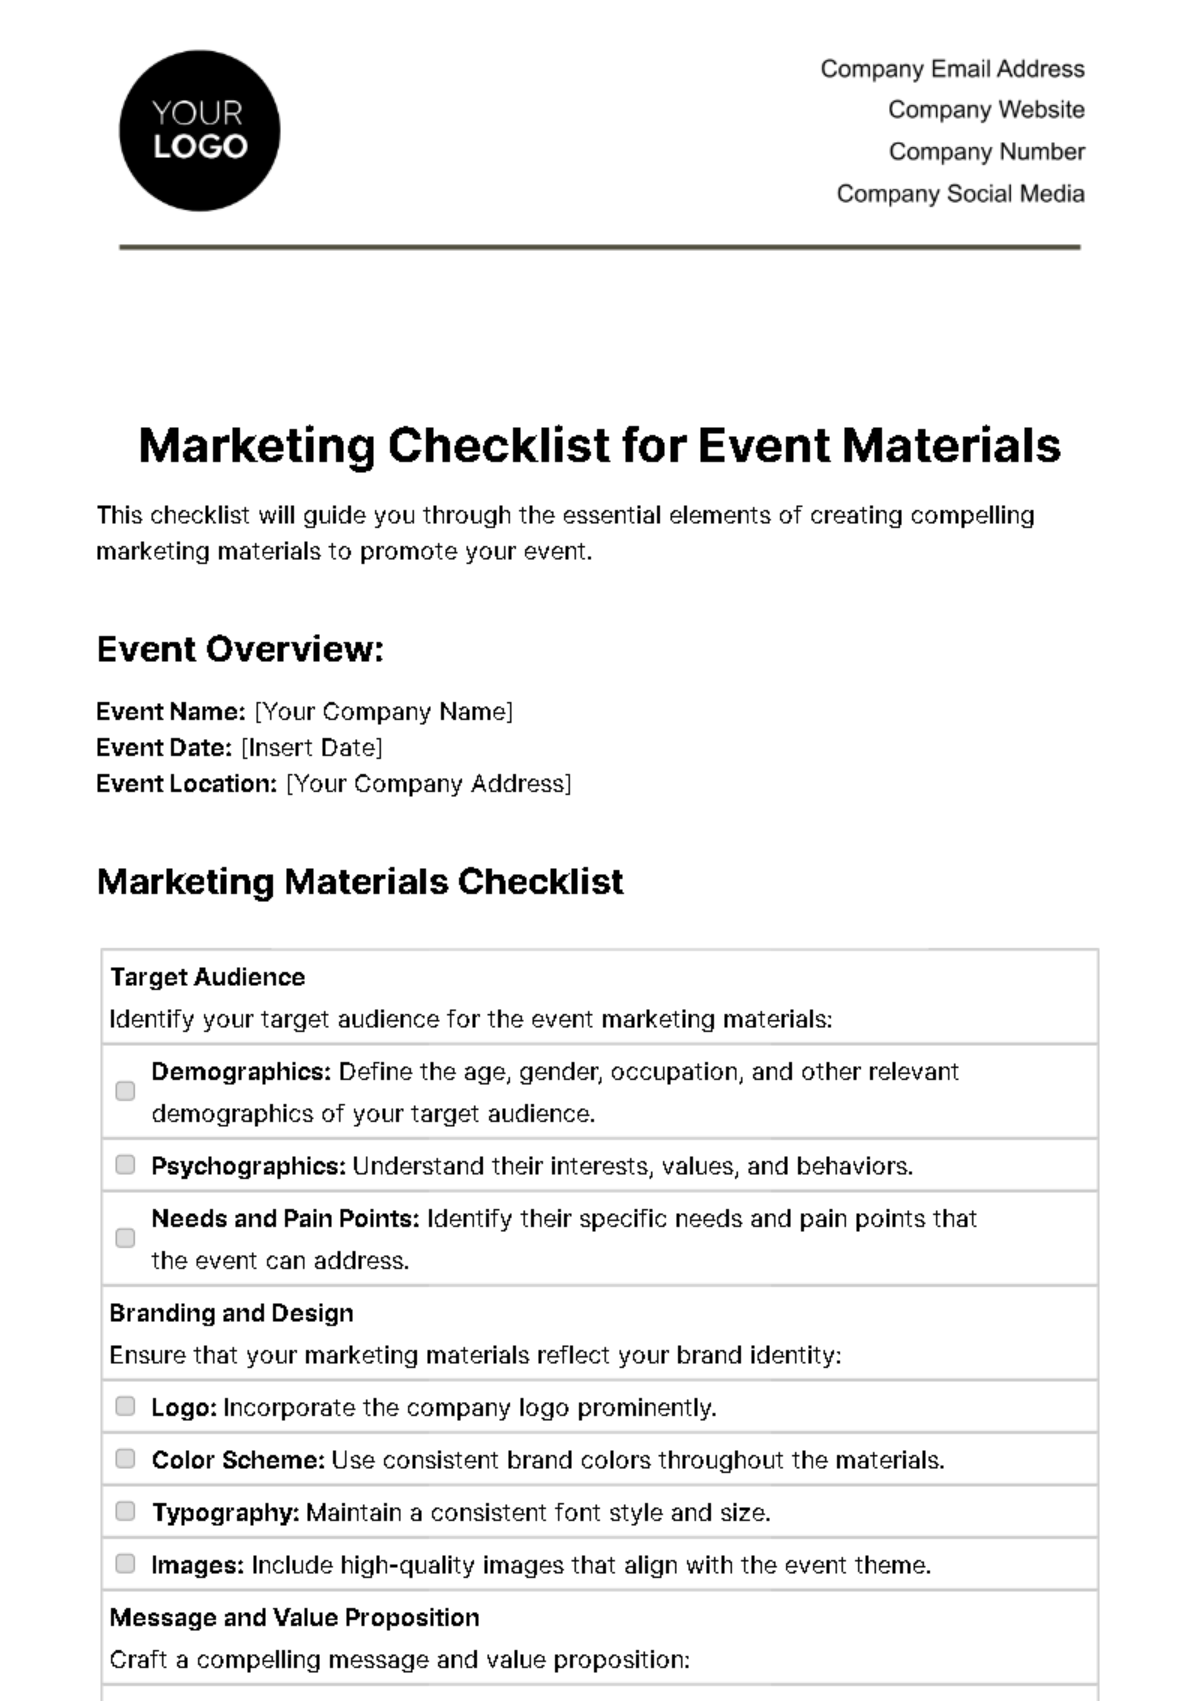 Free Marketing Checklist for Event Materials Template